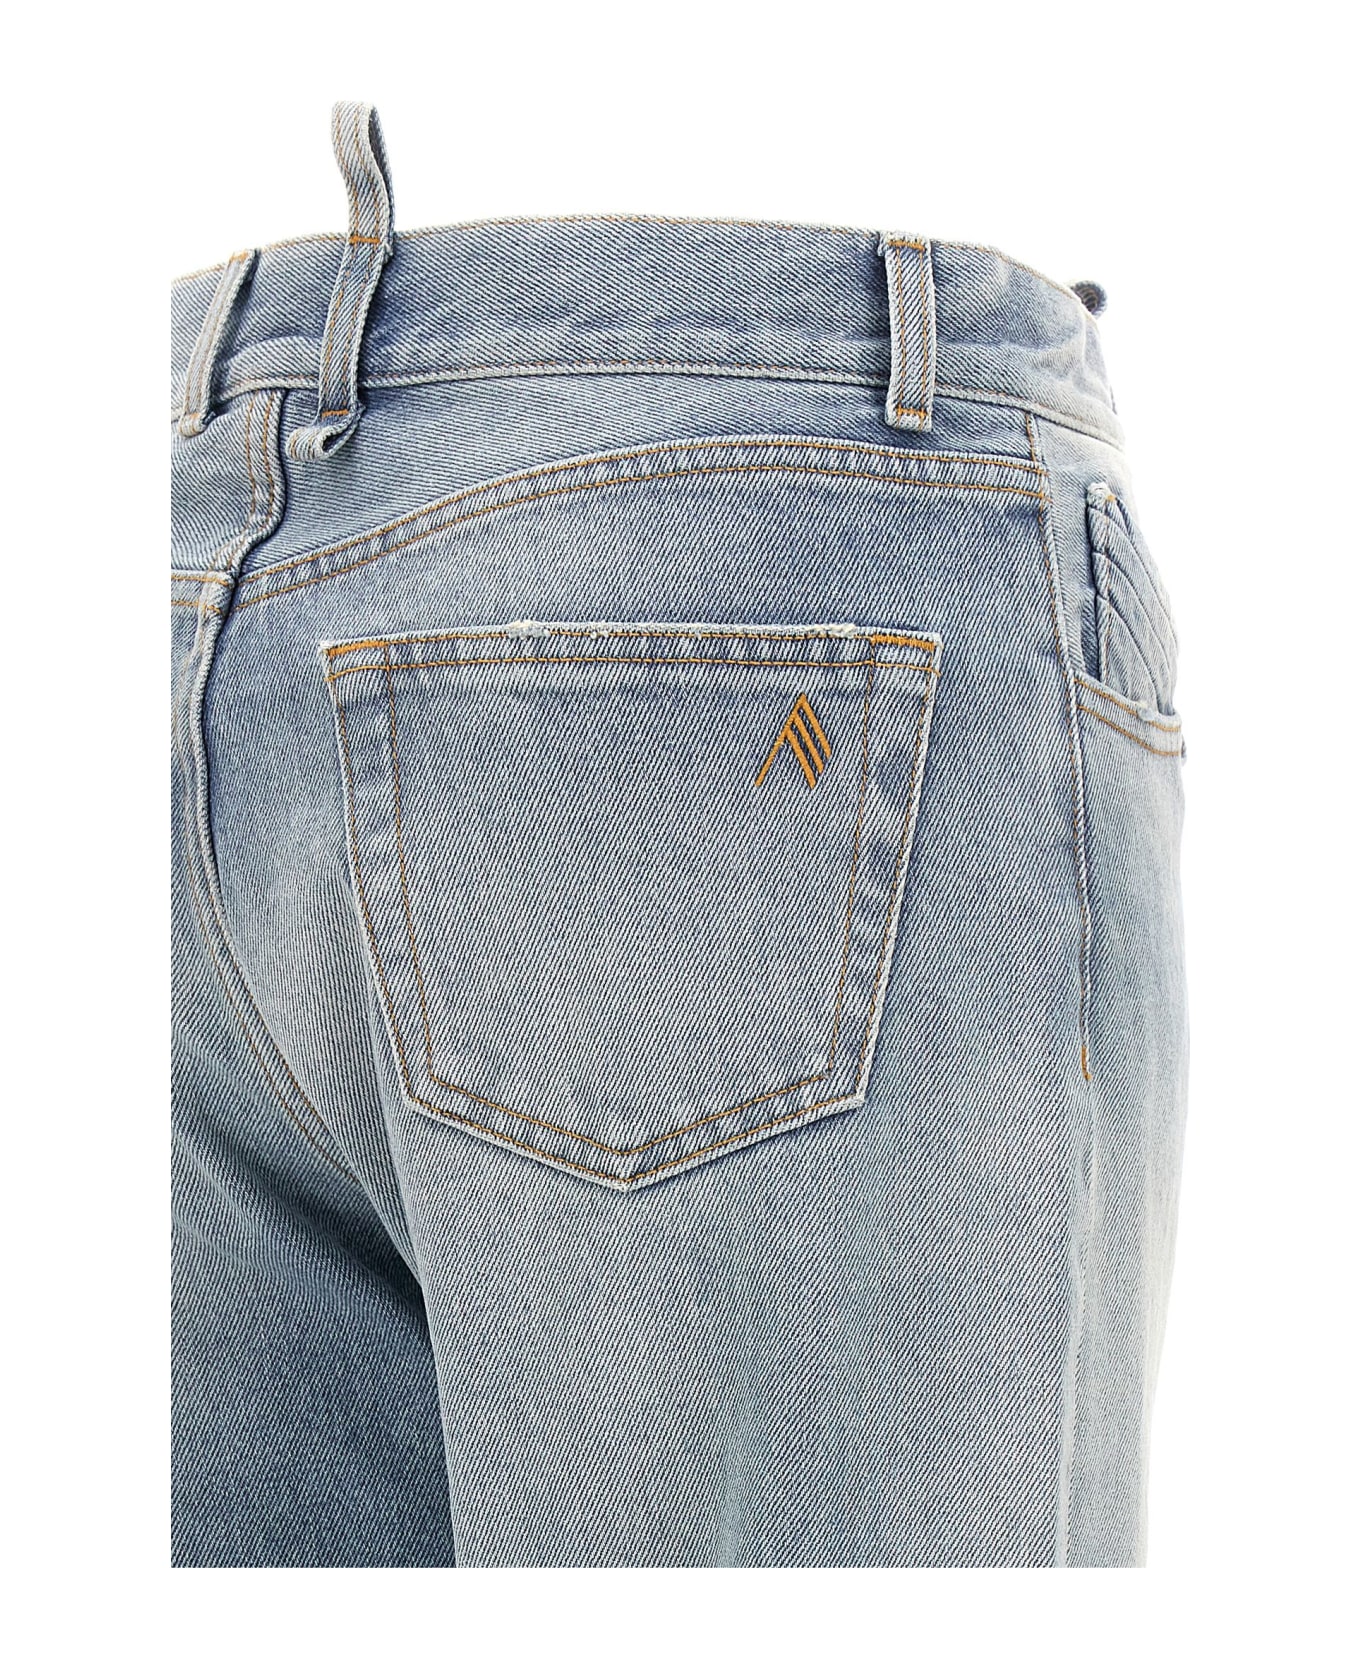 The Attico Belted Jeans - Light Blue